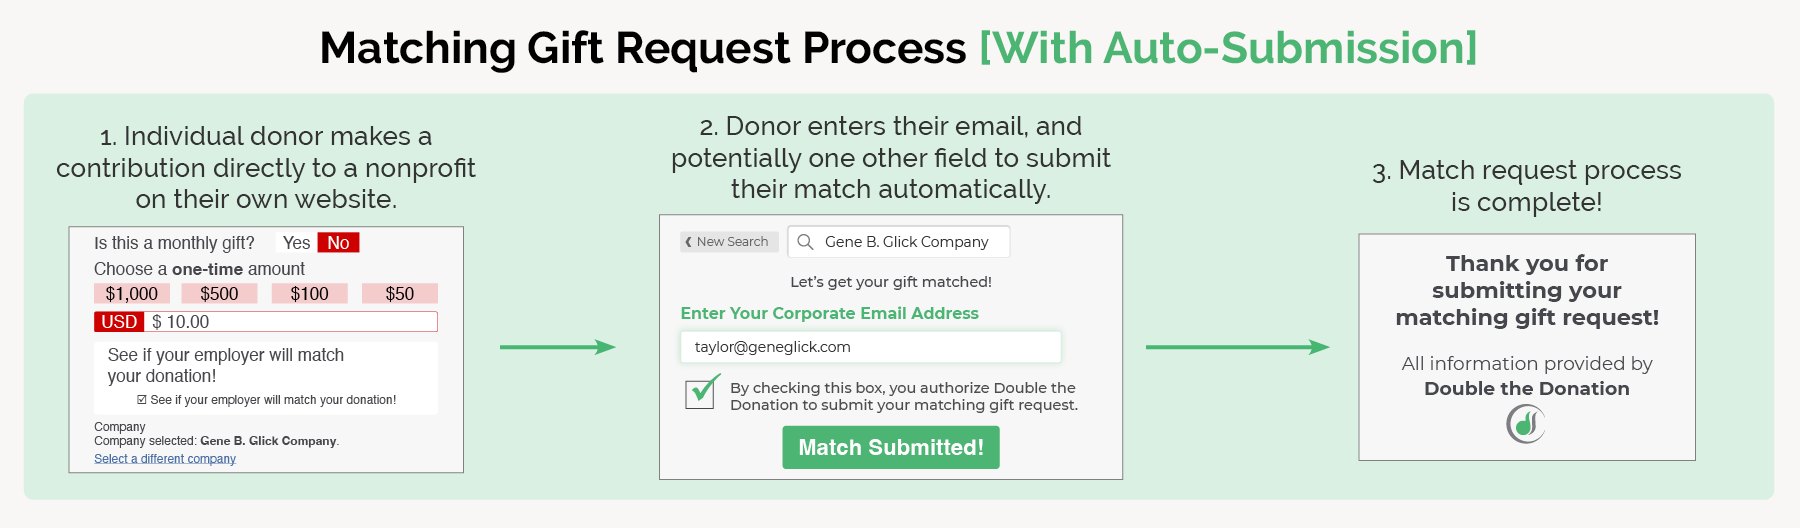 Visuals of the three-step matching gift auto-submission process on alumni websites, listed in the text below